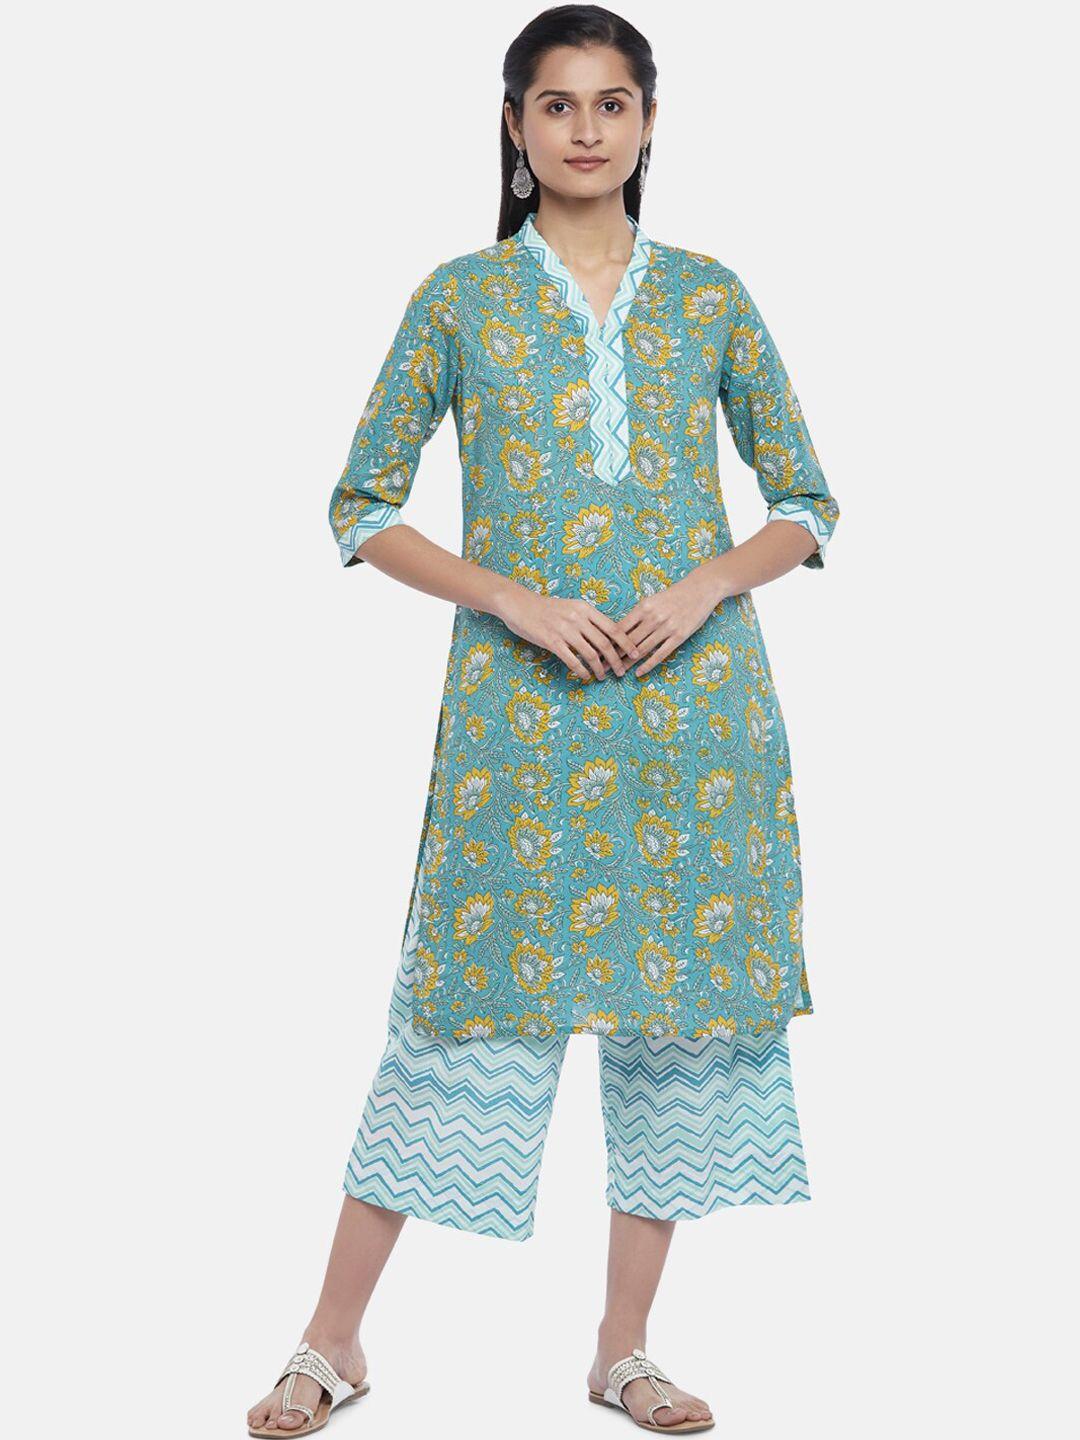 rangmanch by pantaloons women turquoise blue printed pure cotton kurti with trousers & with dupatta